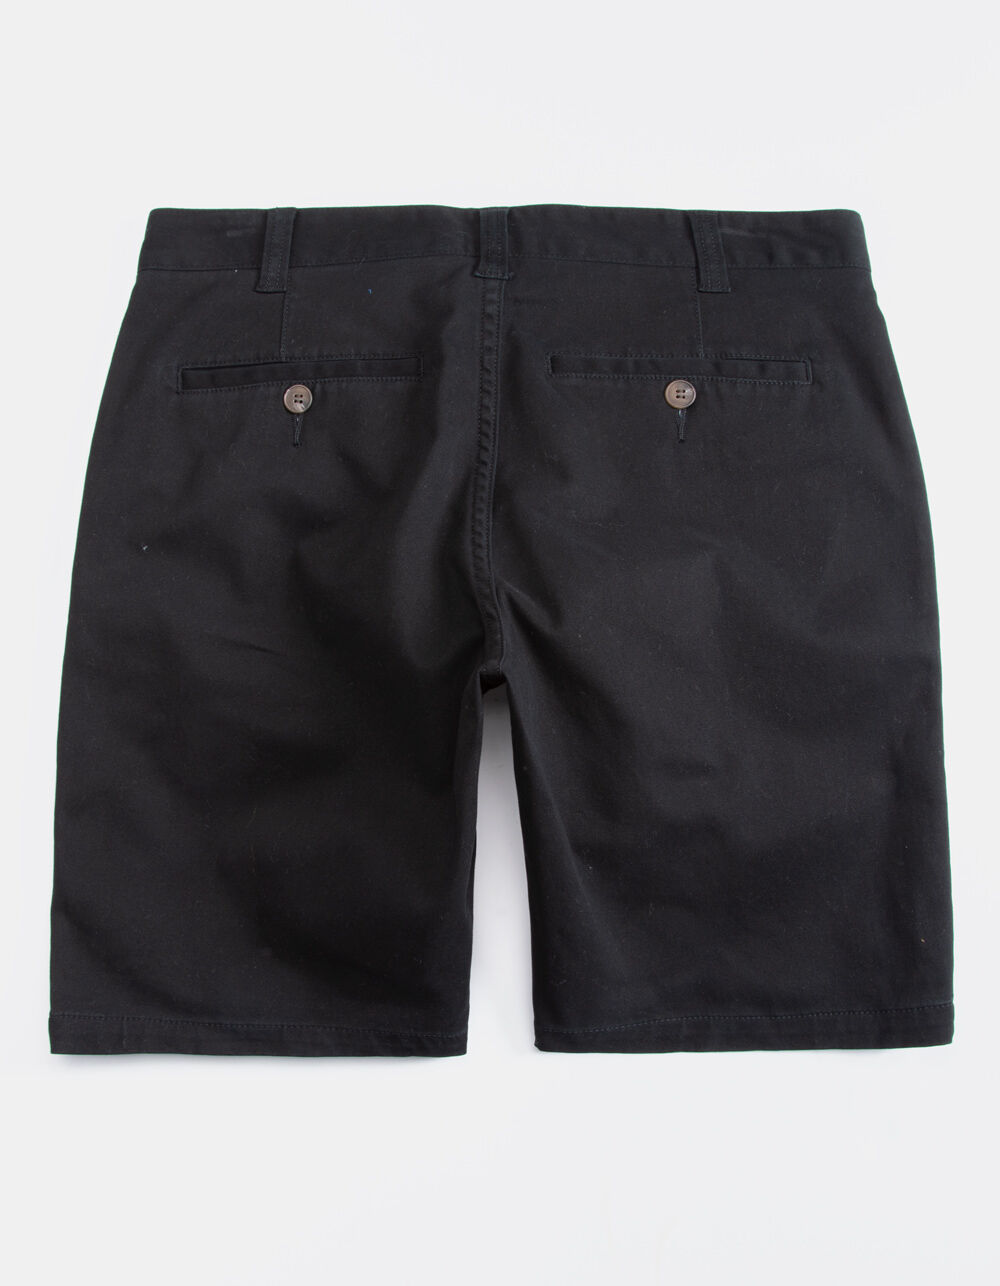 CHARLES AND A HALF Lincoln Stretch Black Mens Shorts - BLACK | Tillys